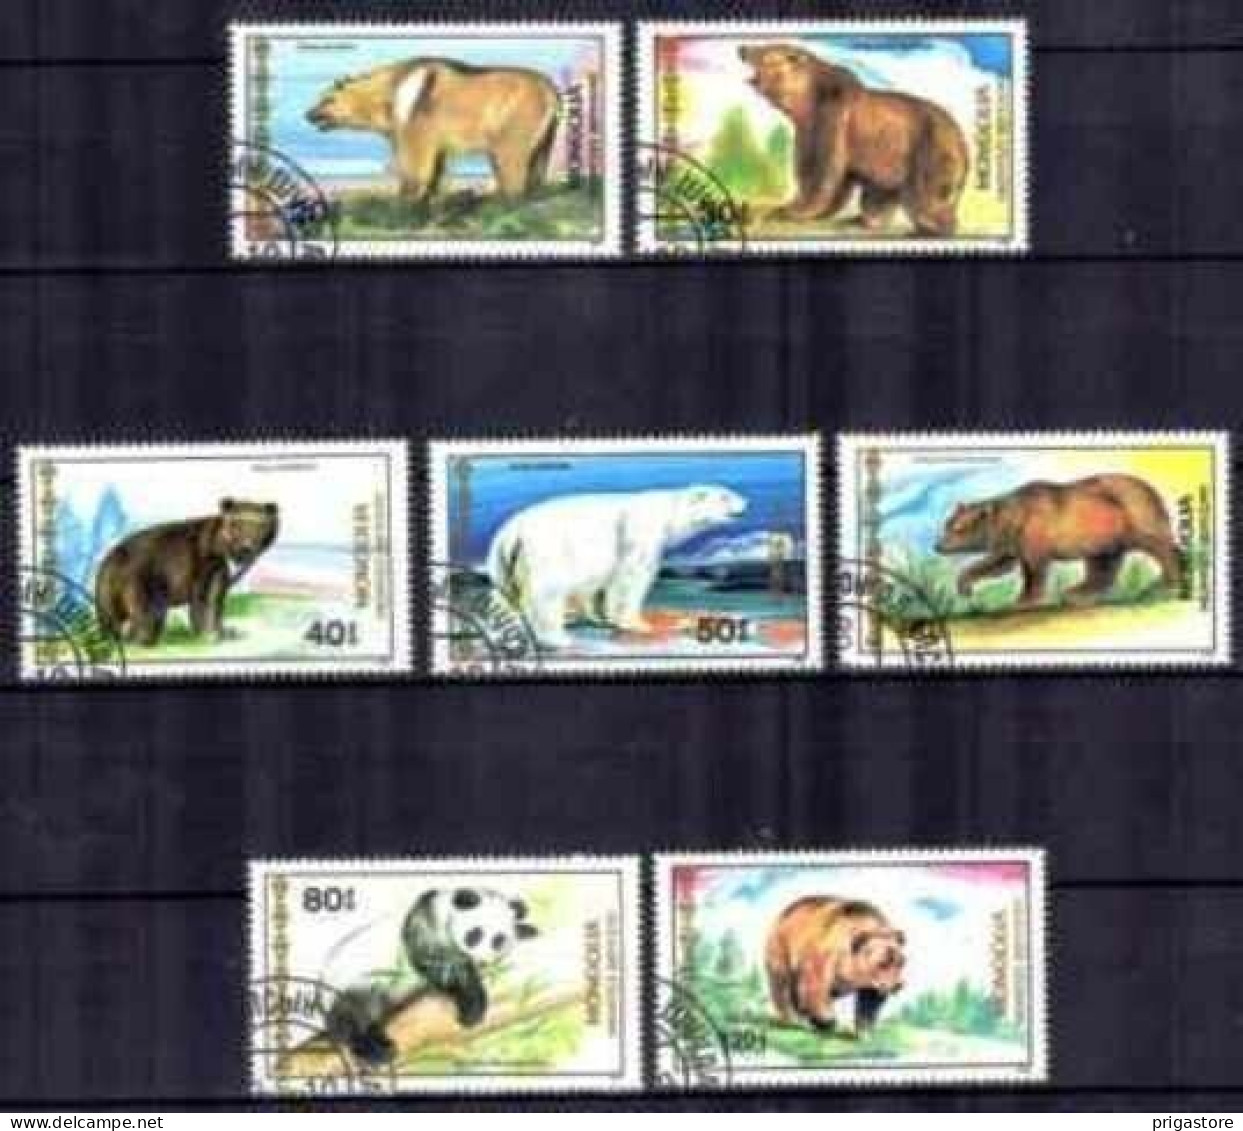 Animaux Ours Mongolie 1989 (108) Yvert N° 1650 à 1656 Oblitéré Used - Bears